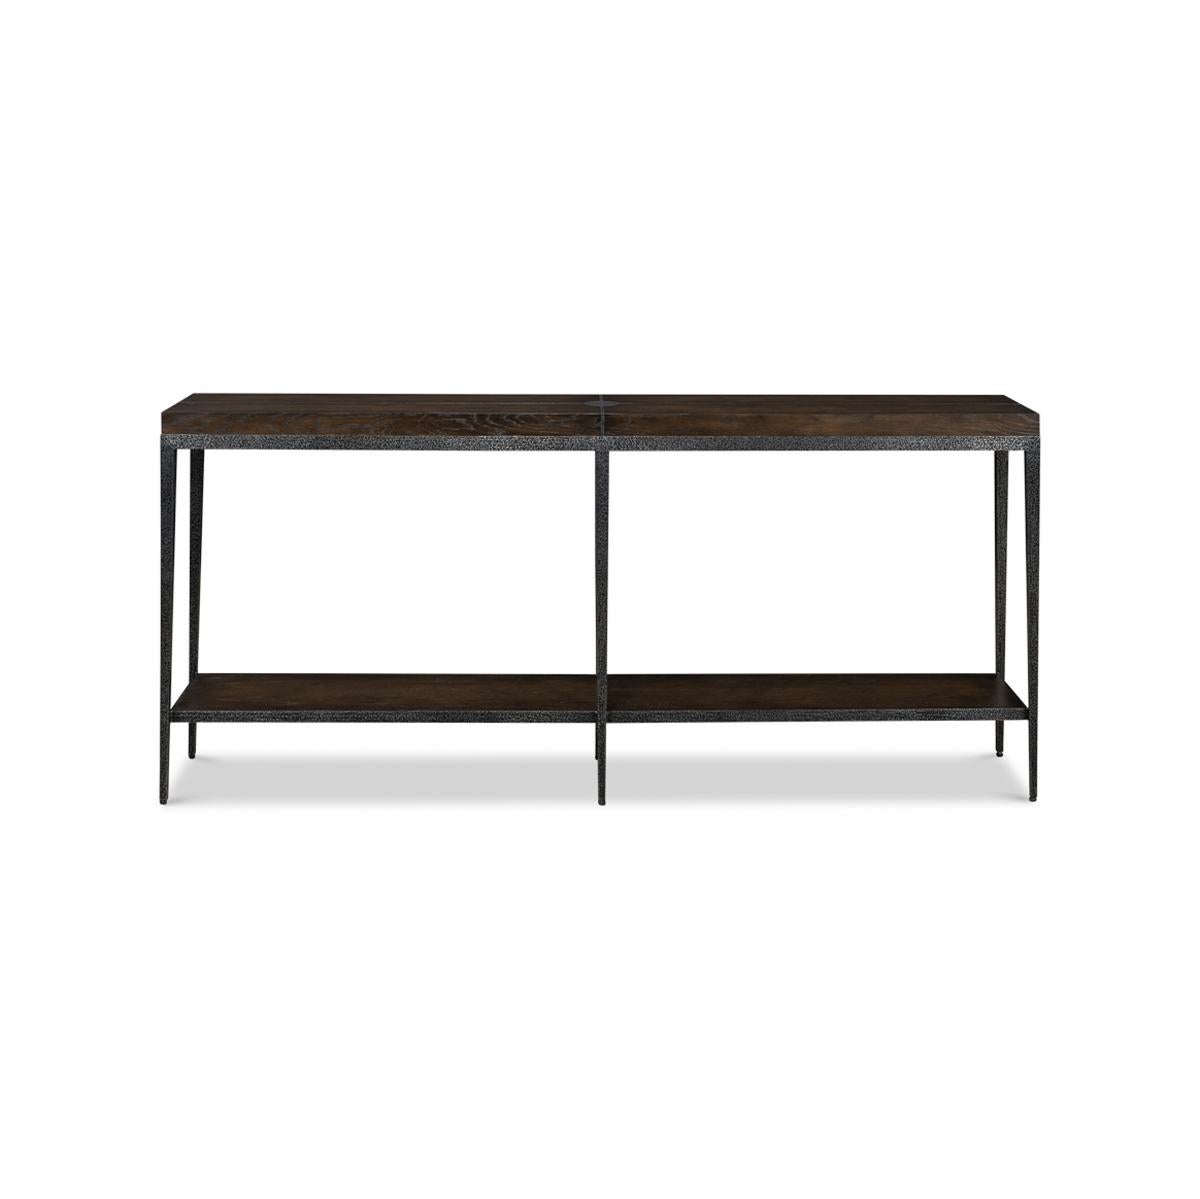 Modern Industrial iron and oak console. This is a stunning piece that combines classic industrial style with modern design. The Artisan Grey dark finish on the oak top and lower shelf is beautifully contrasted by the metal inlays radiating from the